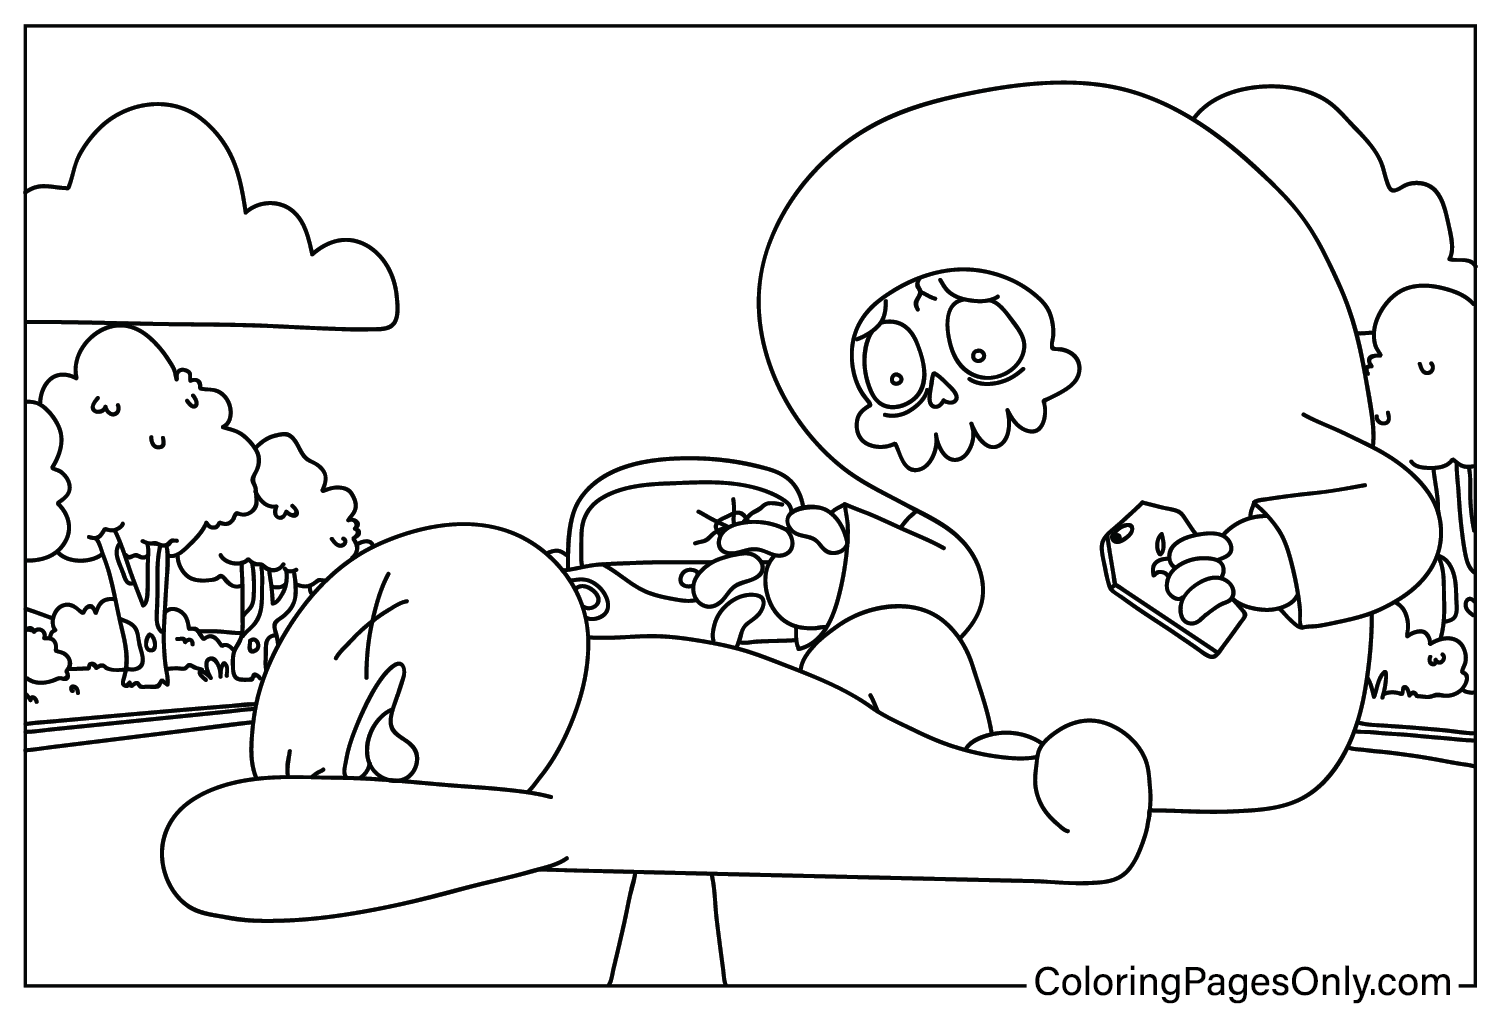 TheOdd1sOut Coloring Sheet for Kids from TheOdd1sOut